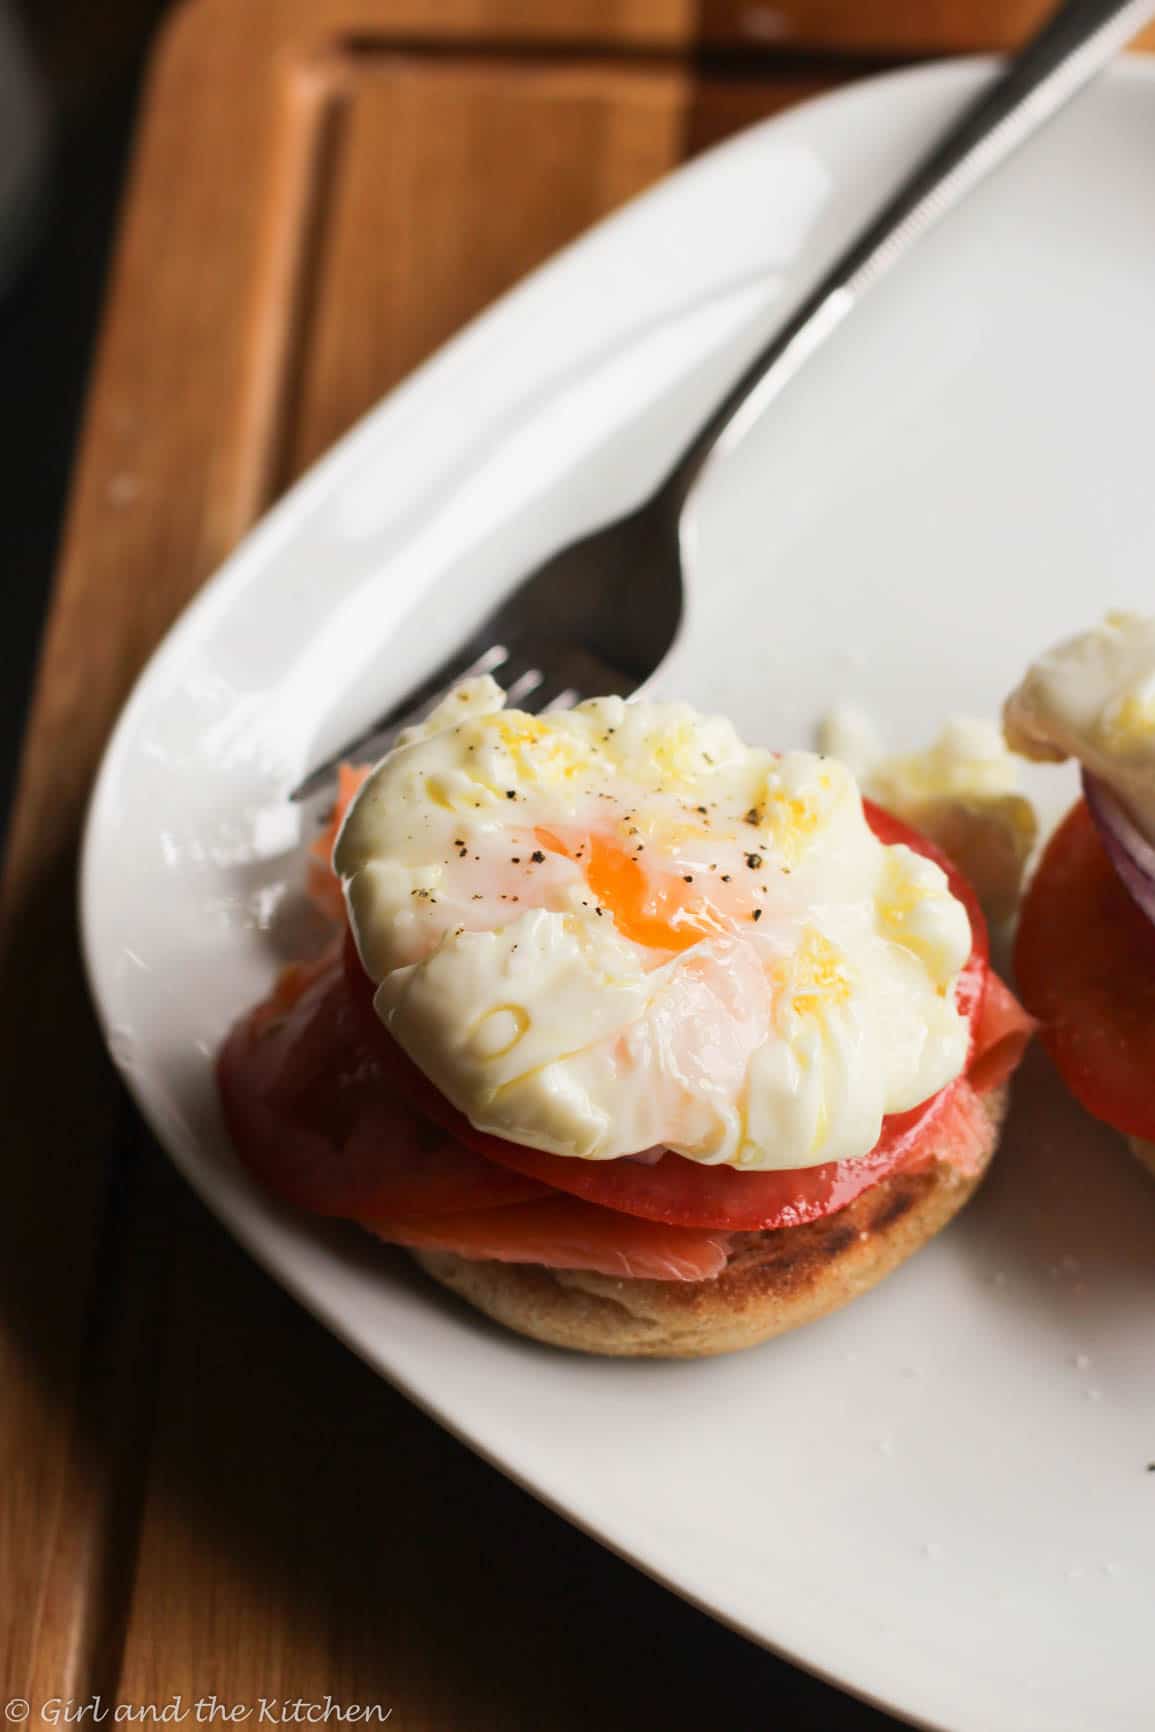 This smoked salmon and poached egg sandwich is both elegant and delicious! This classic egg breakfast sandwich features smoked salmon and a poached egg!